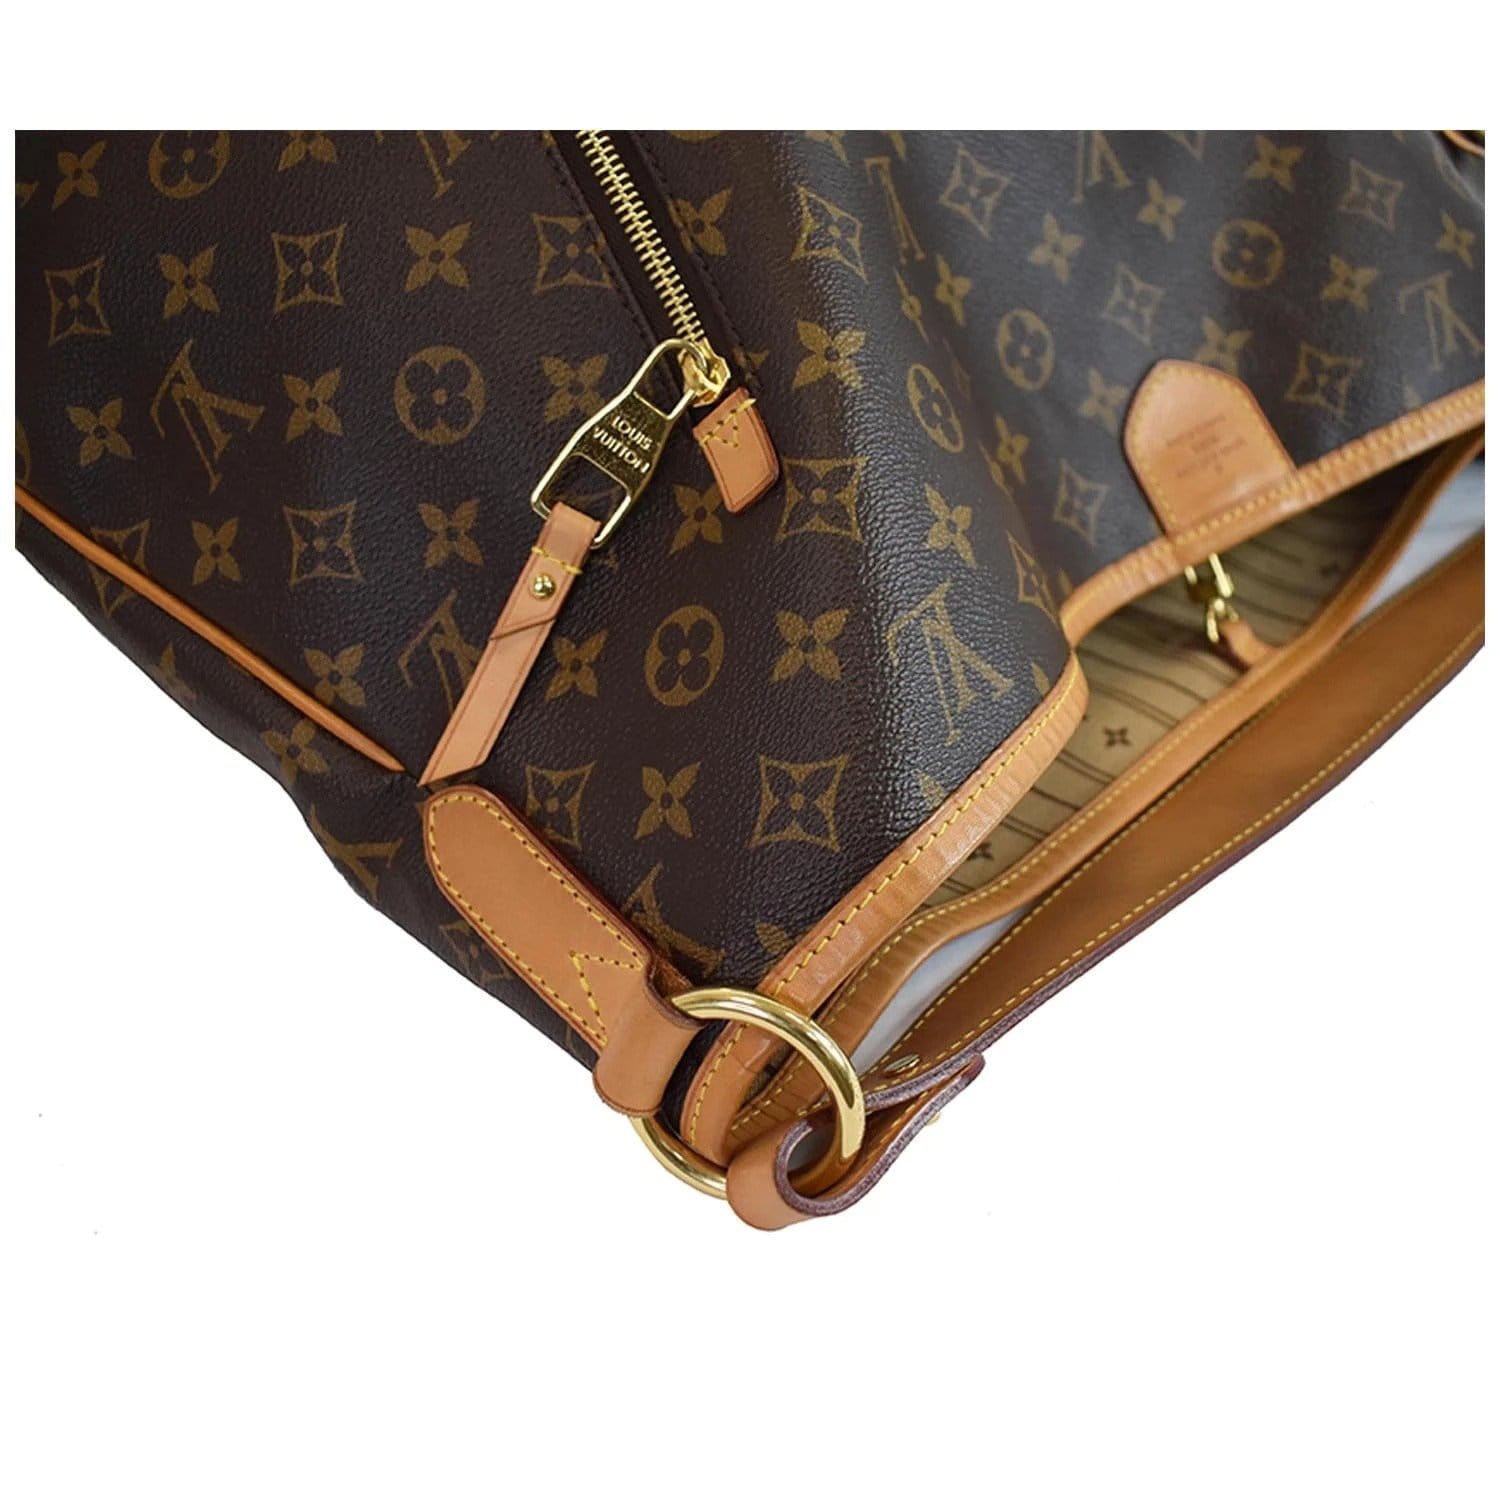 Delightful leather handbag Louis Vuitton Brown in Leather - 21429545